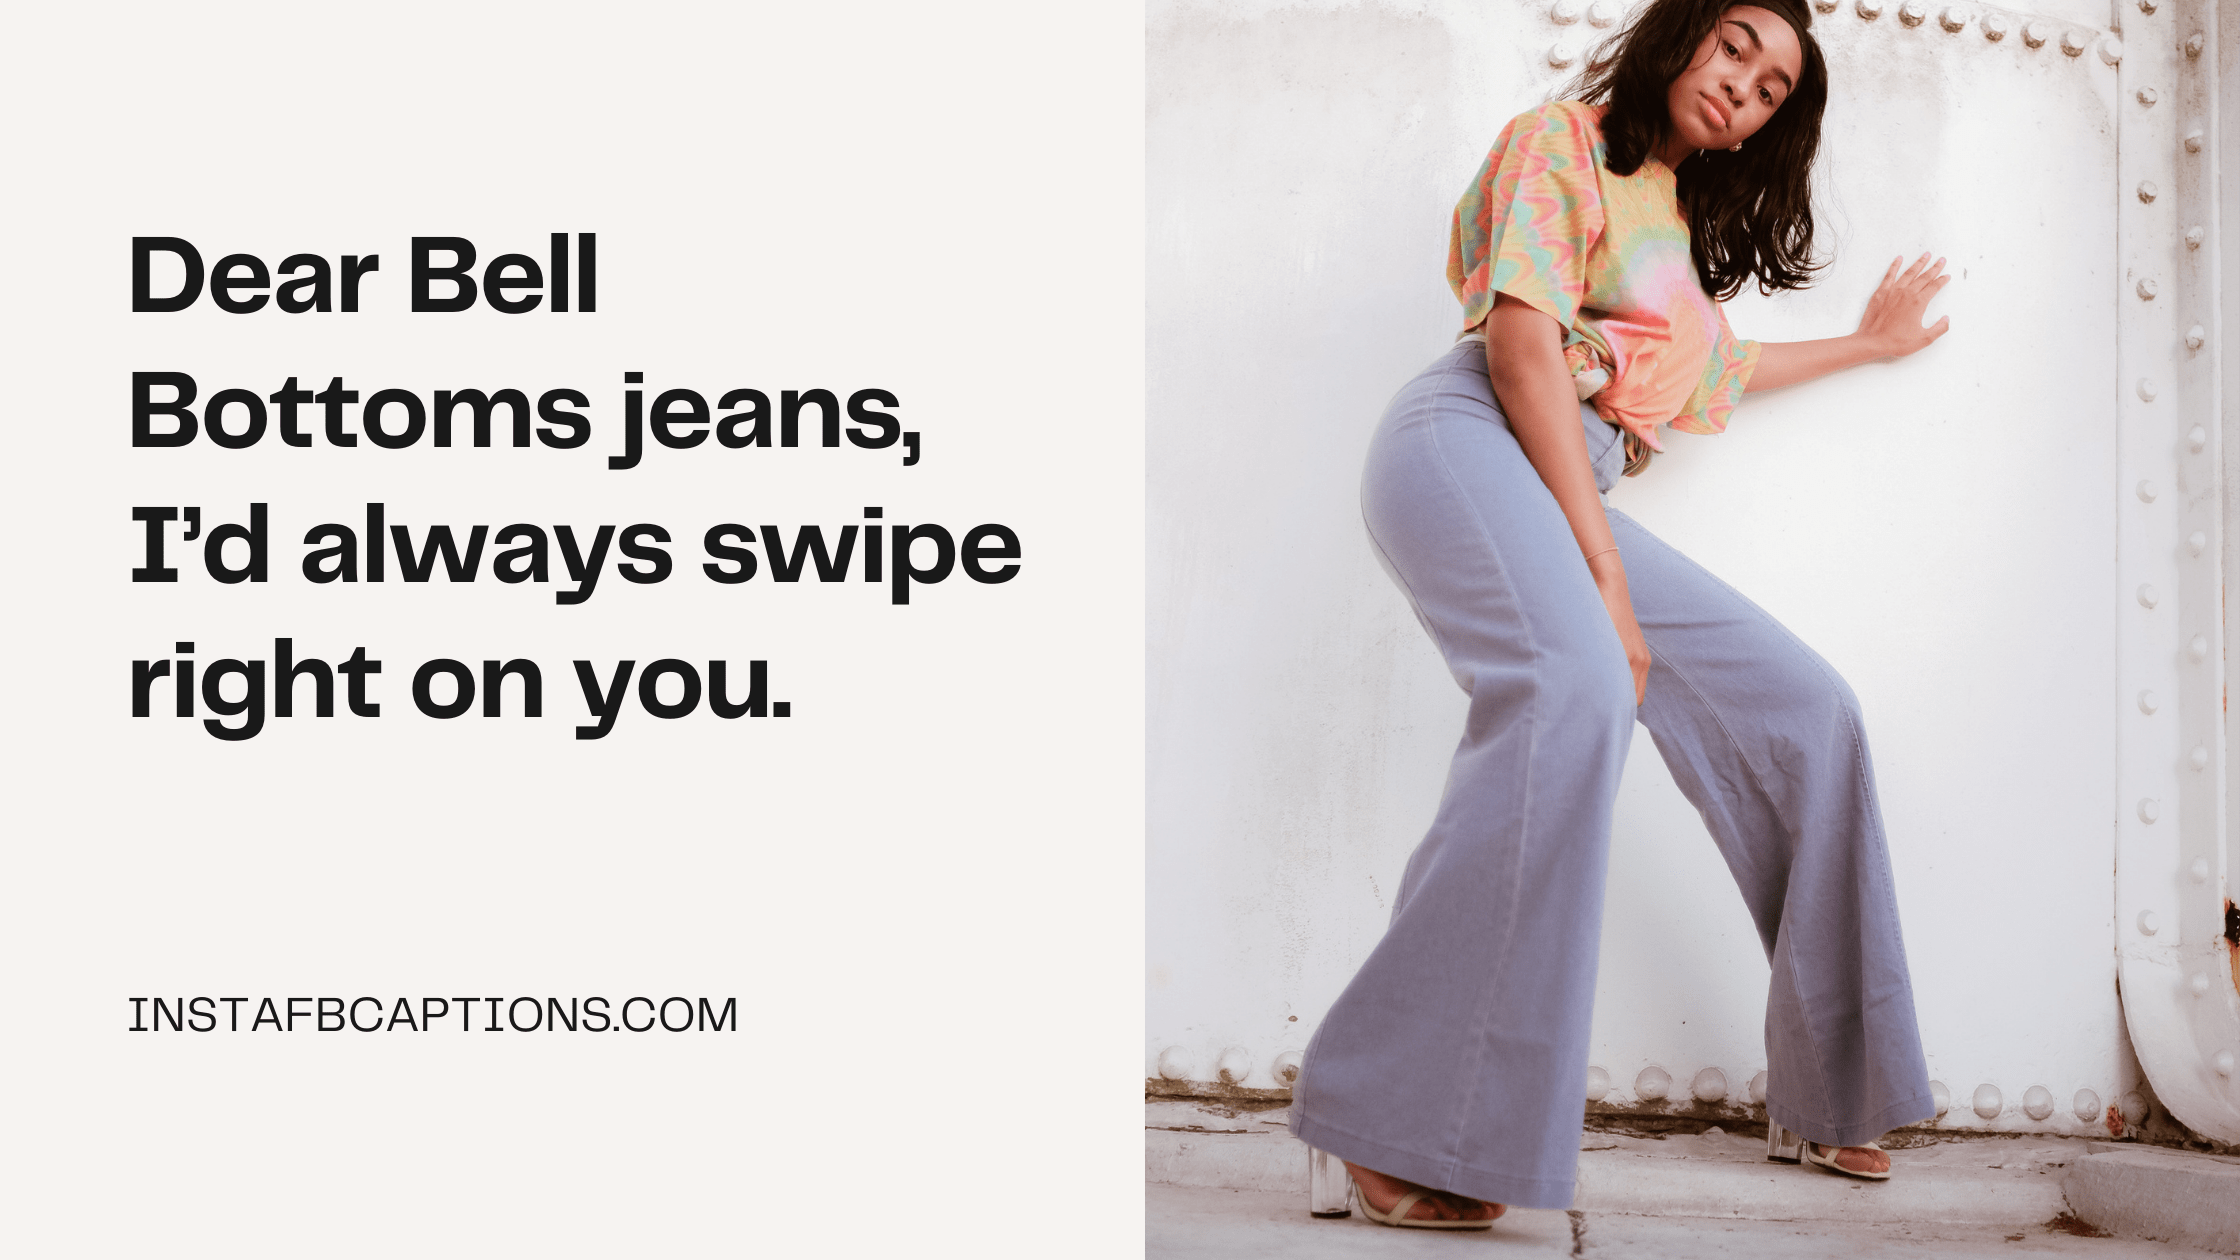 Bell Bottoms Jeans Captions  - Bell Bottoms Jeans Captions  - 112 JEANS Instagram Captions Quotes in 2022